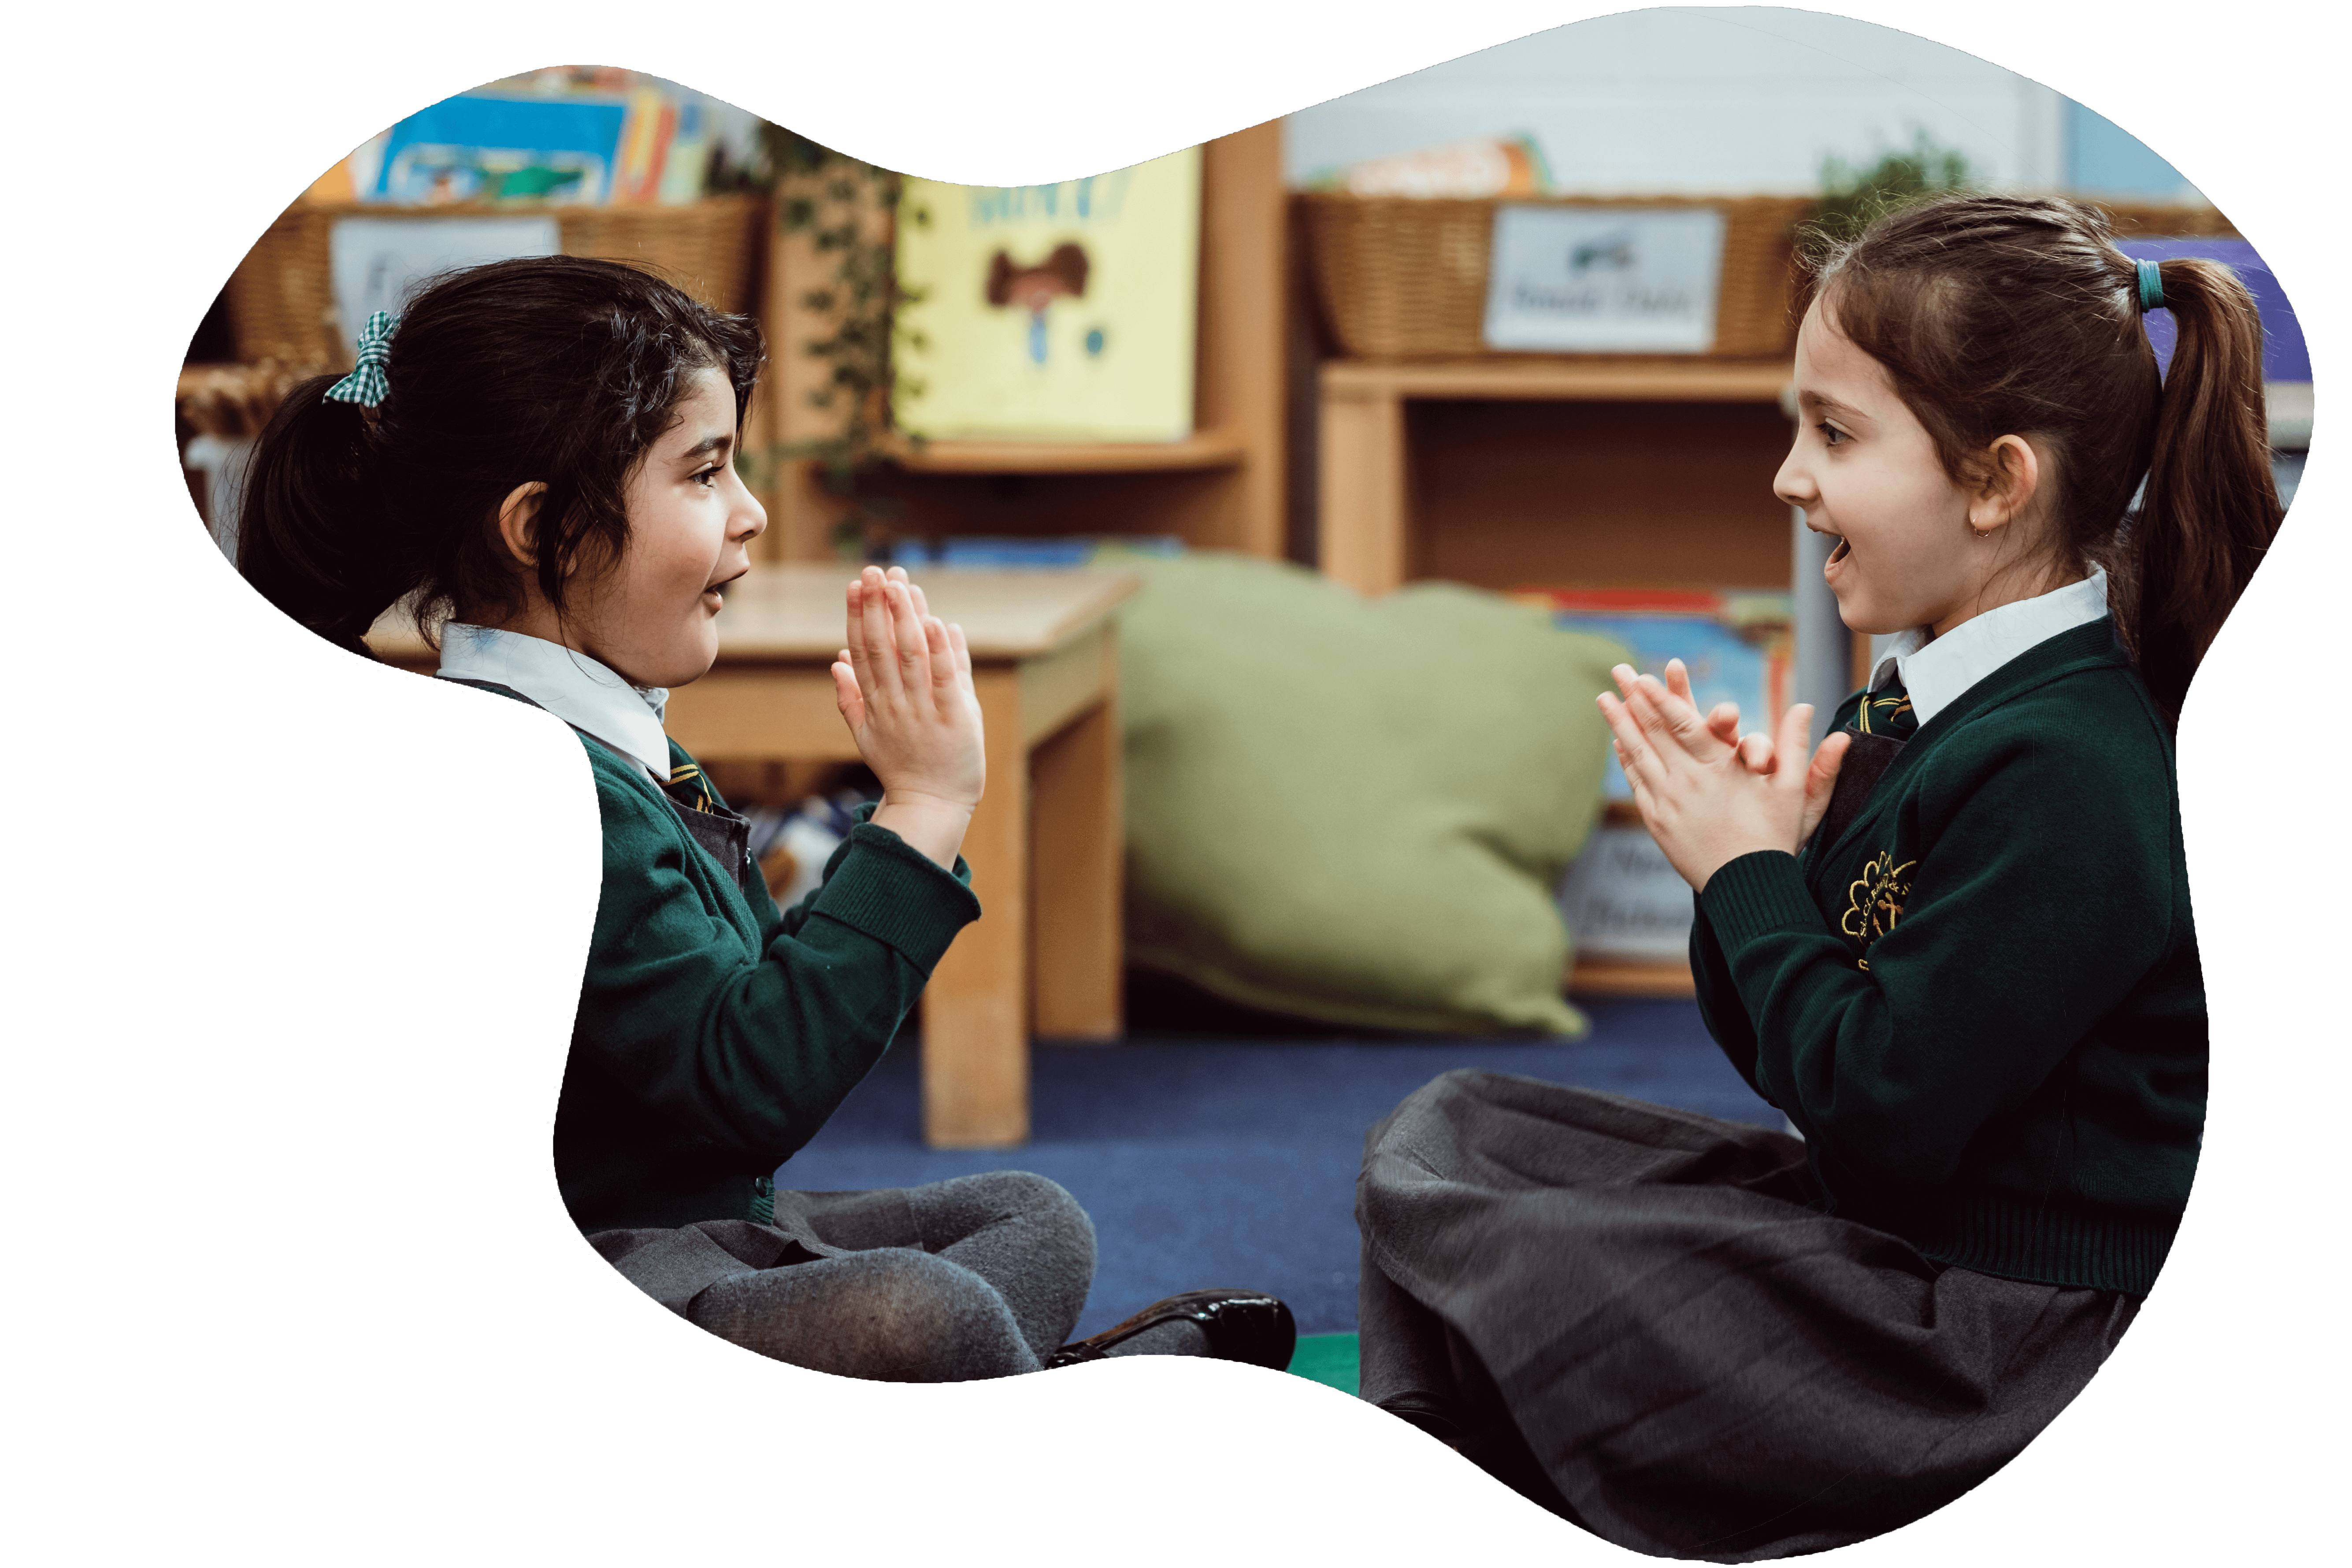 Two young students in school uniforms are seated on the floor facing each other, their hands up as if in a clapping game, sharing a moment of connection and joy in a classroom setting filled with educational materials. Their expressions suggest engagement and happiness in the learning activity they are participating in.